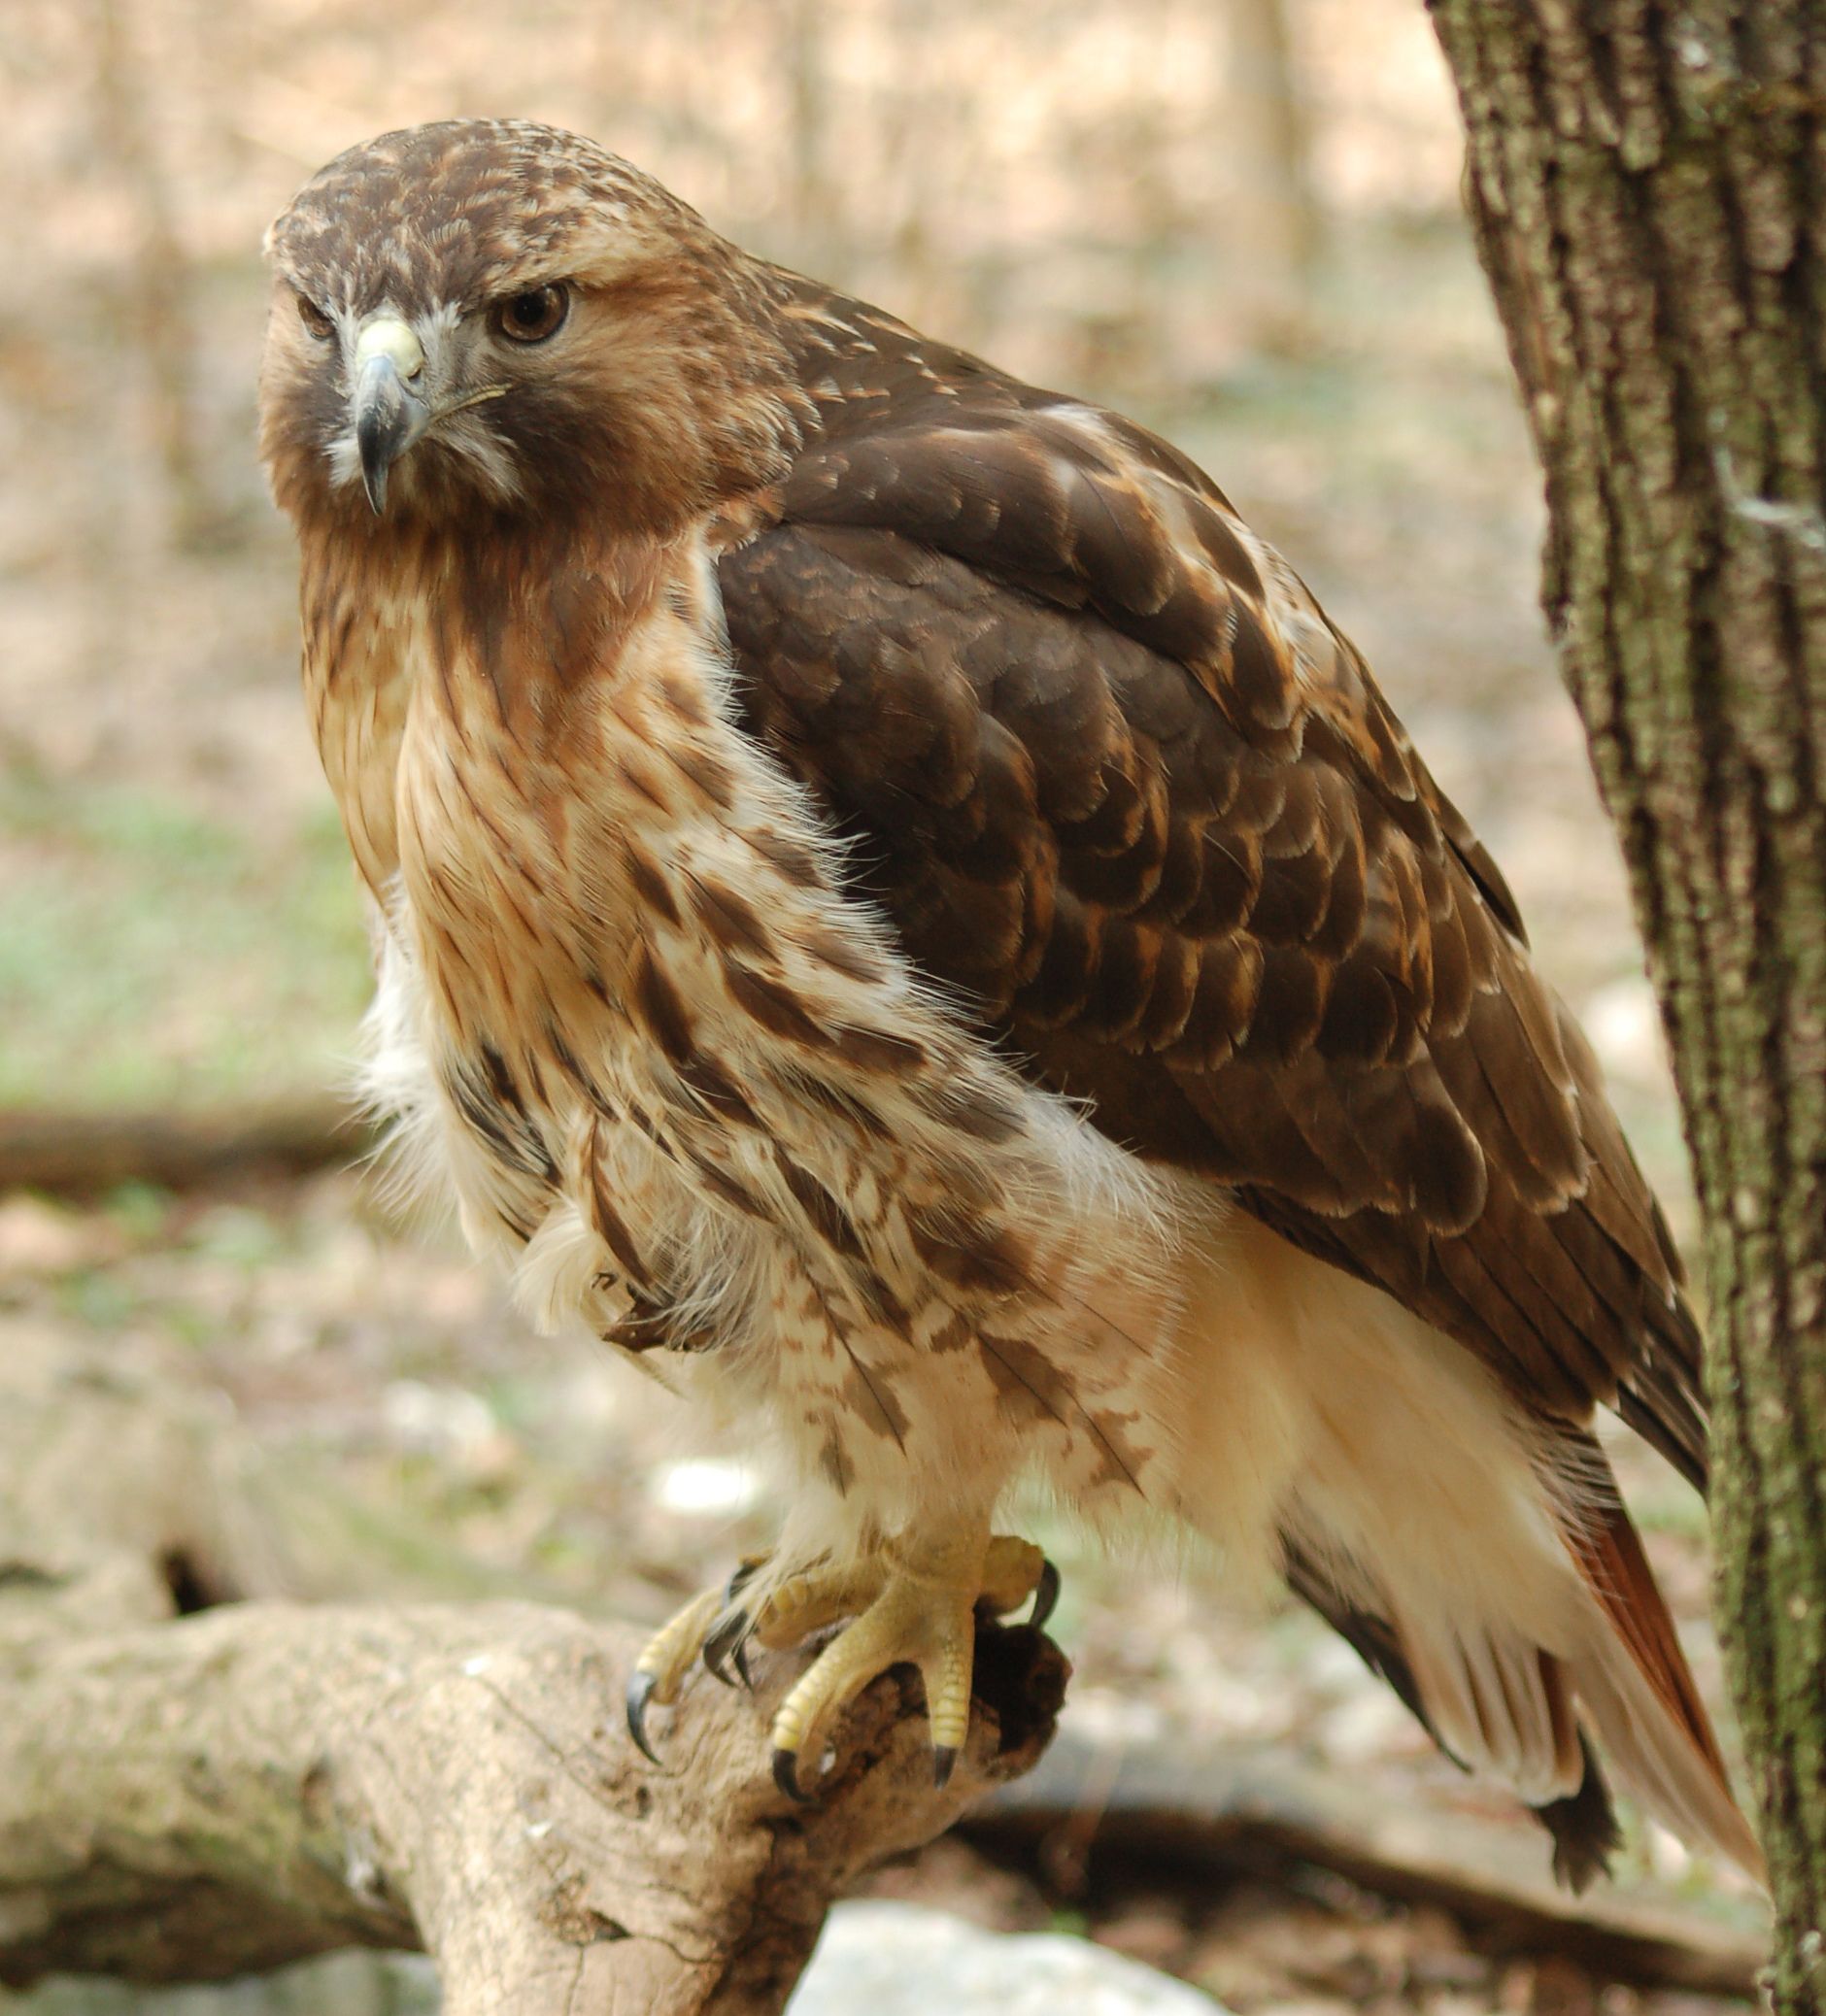 Hawk Spirit Meaning, Symbols, and Totem | Red tailed hawk, Bird and ...